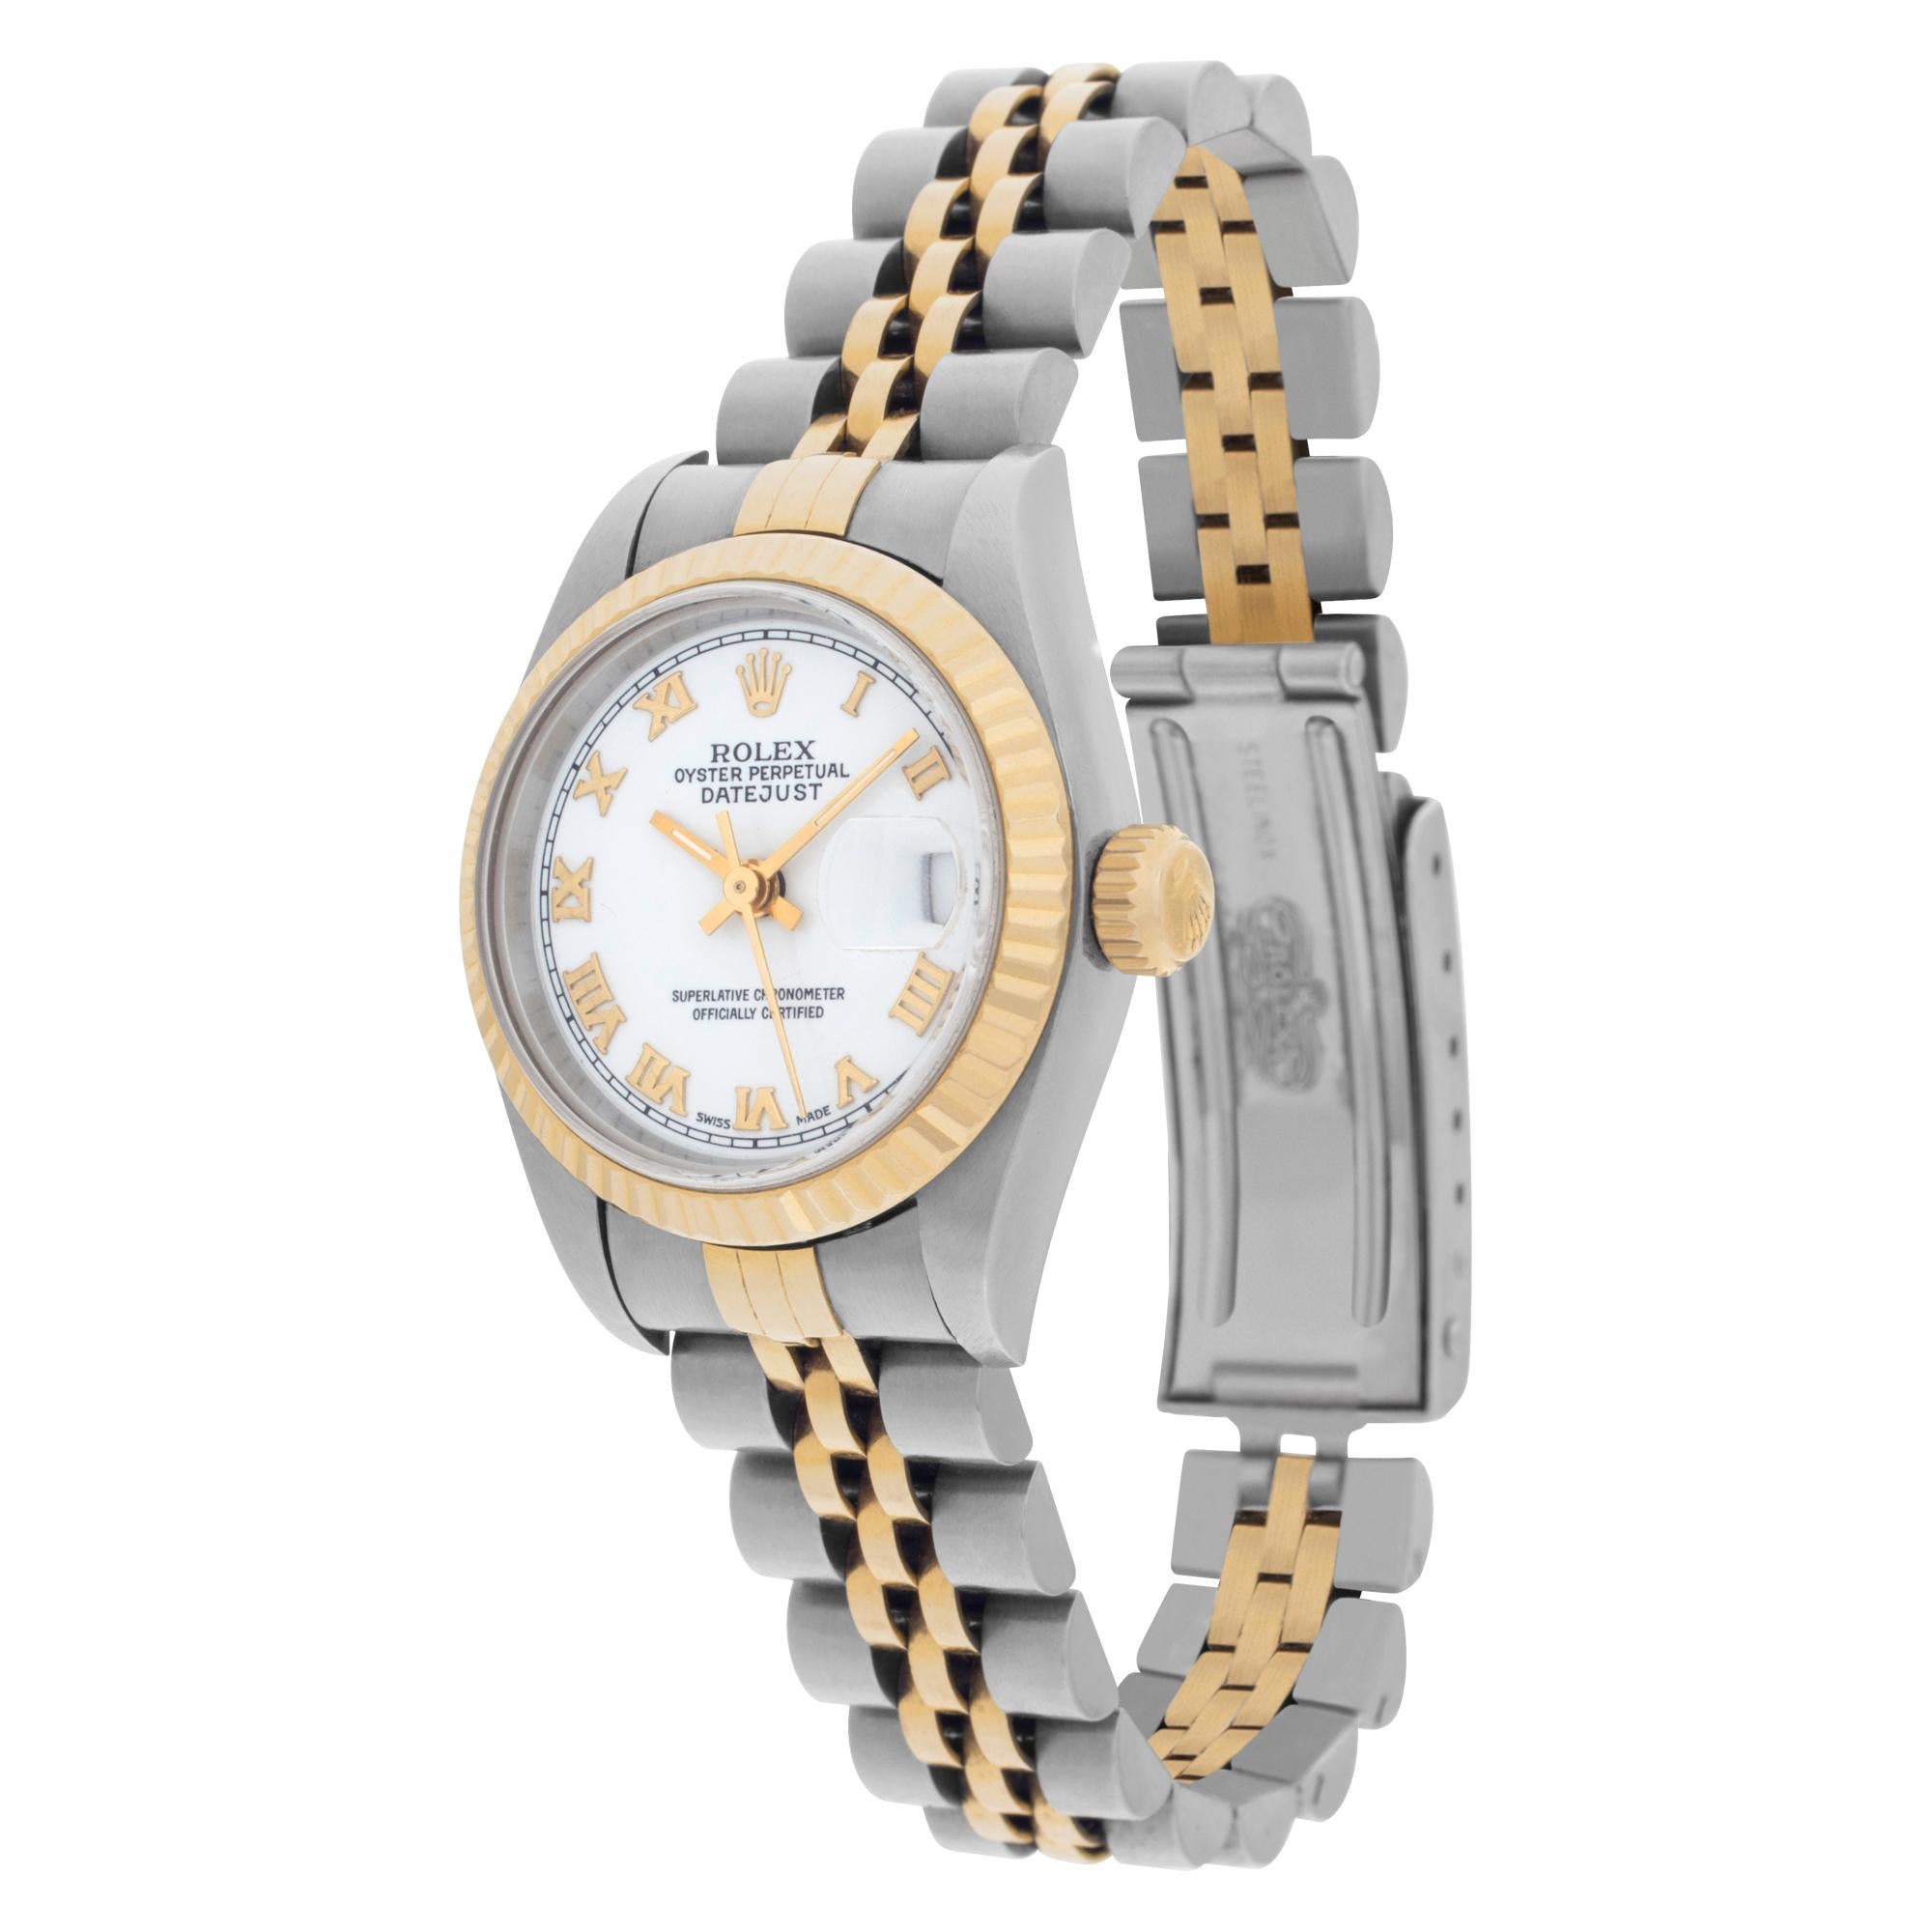 Rolex Datejust in 18k yellow gold & stainless steel on a Jubilee bracelet with white dial set with Roman numeral hour markers. Auto w/ sweep seconds and date. 26 mm case size. Ref 69173. Circa 1996. Fine Pre-owned Rolex Watch.

Certified preowned